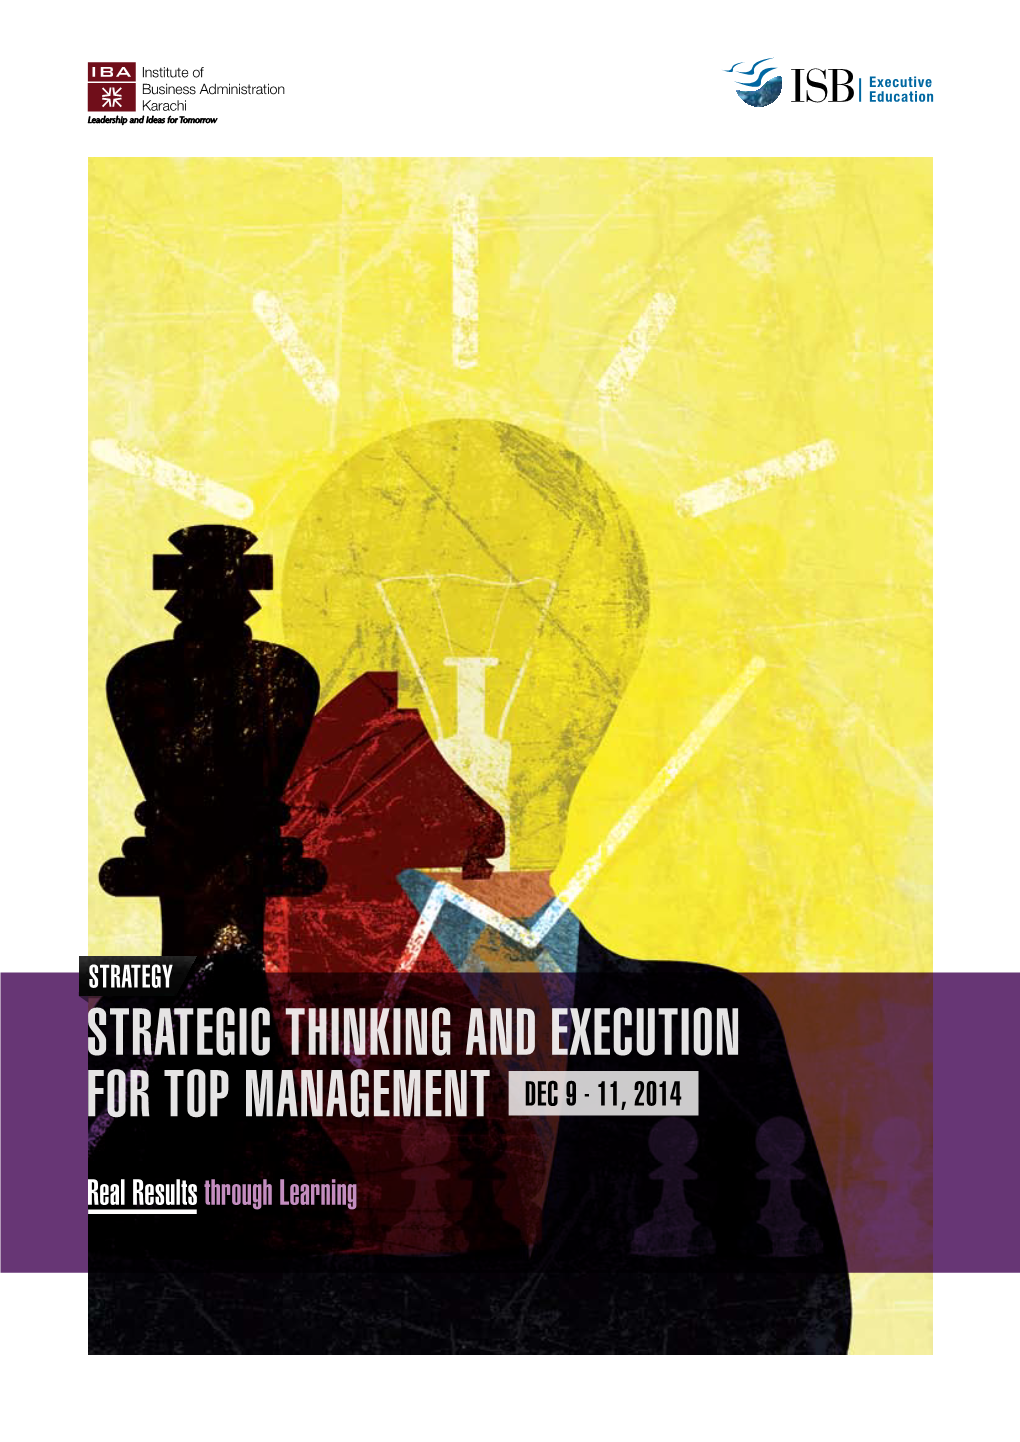 Strategic Thinking and Execution for Top Management Dec 9 - 11, 2014